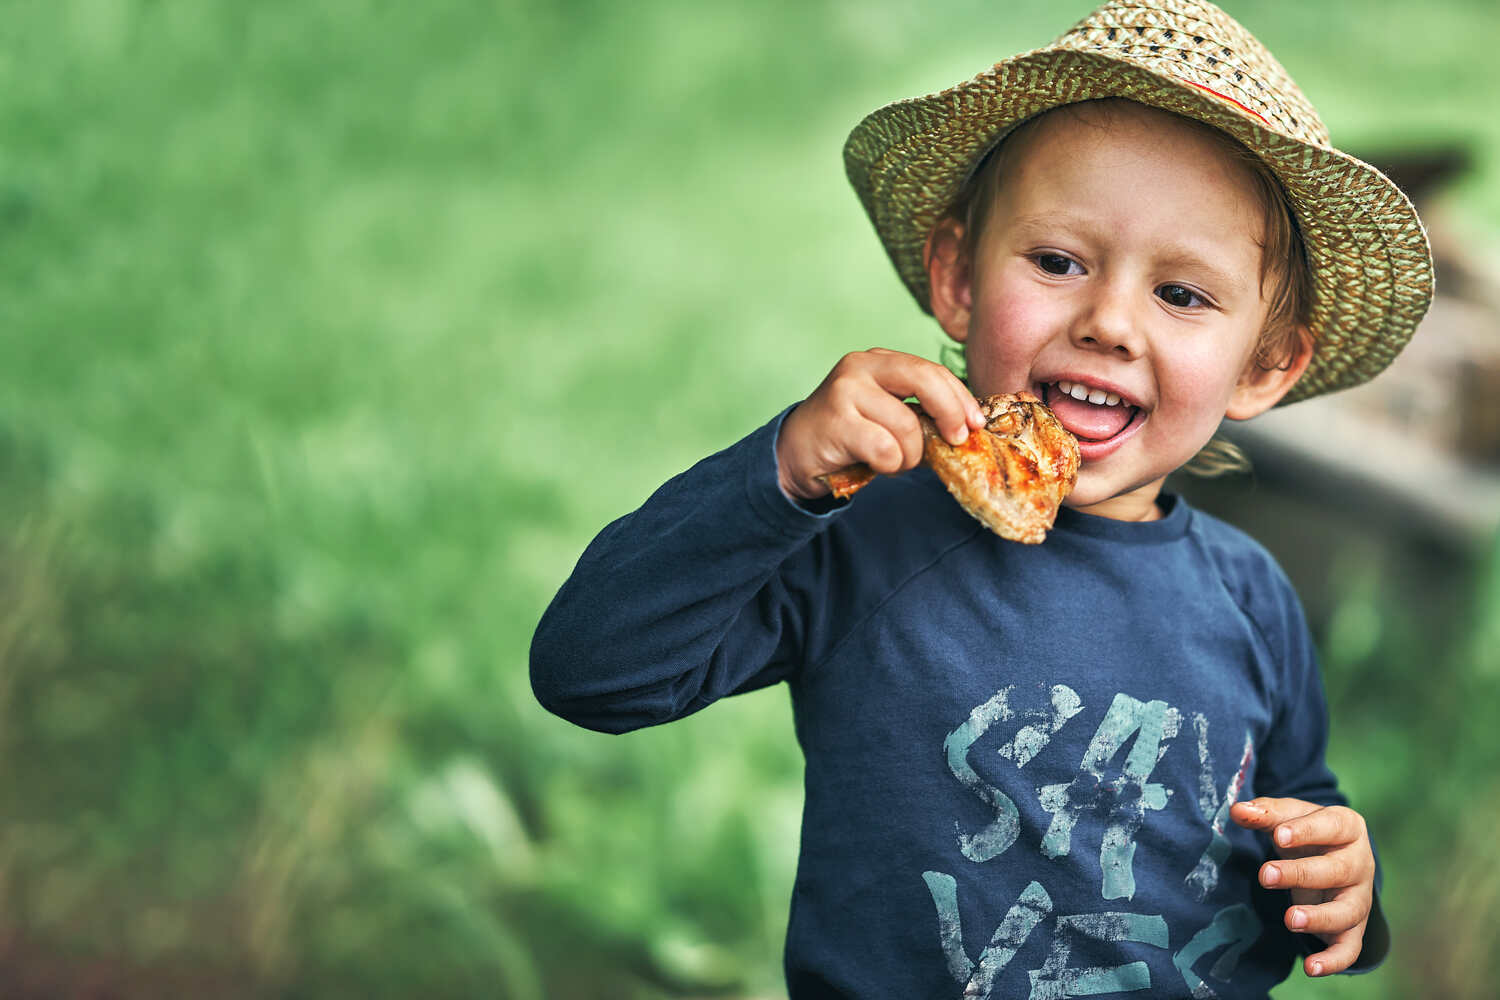 Like any other food item, meat too can cause choking in toddlers